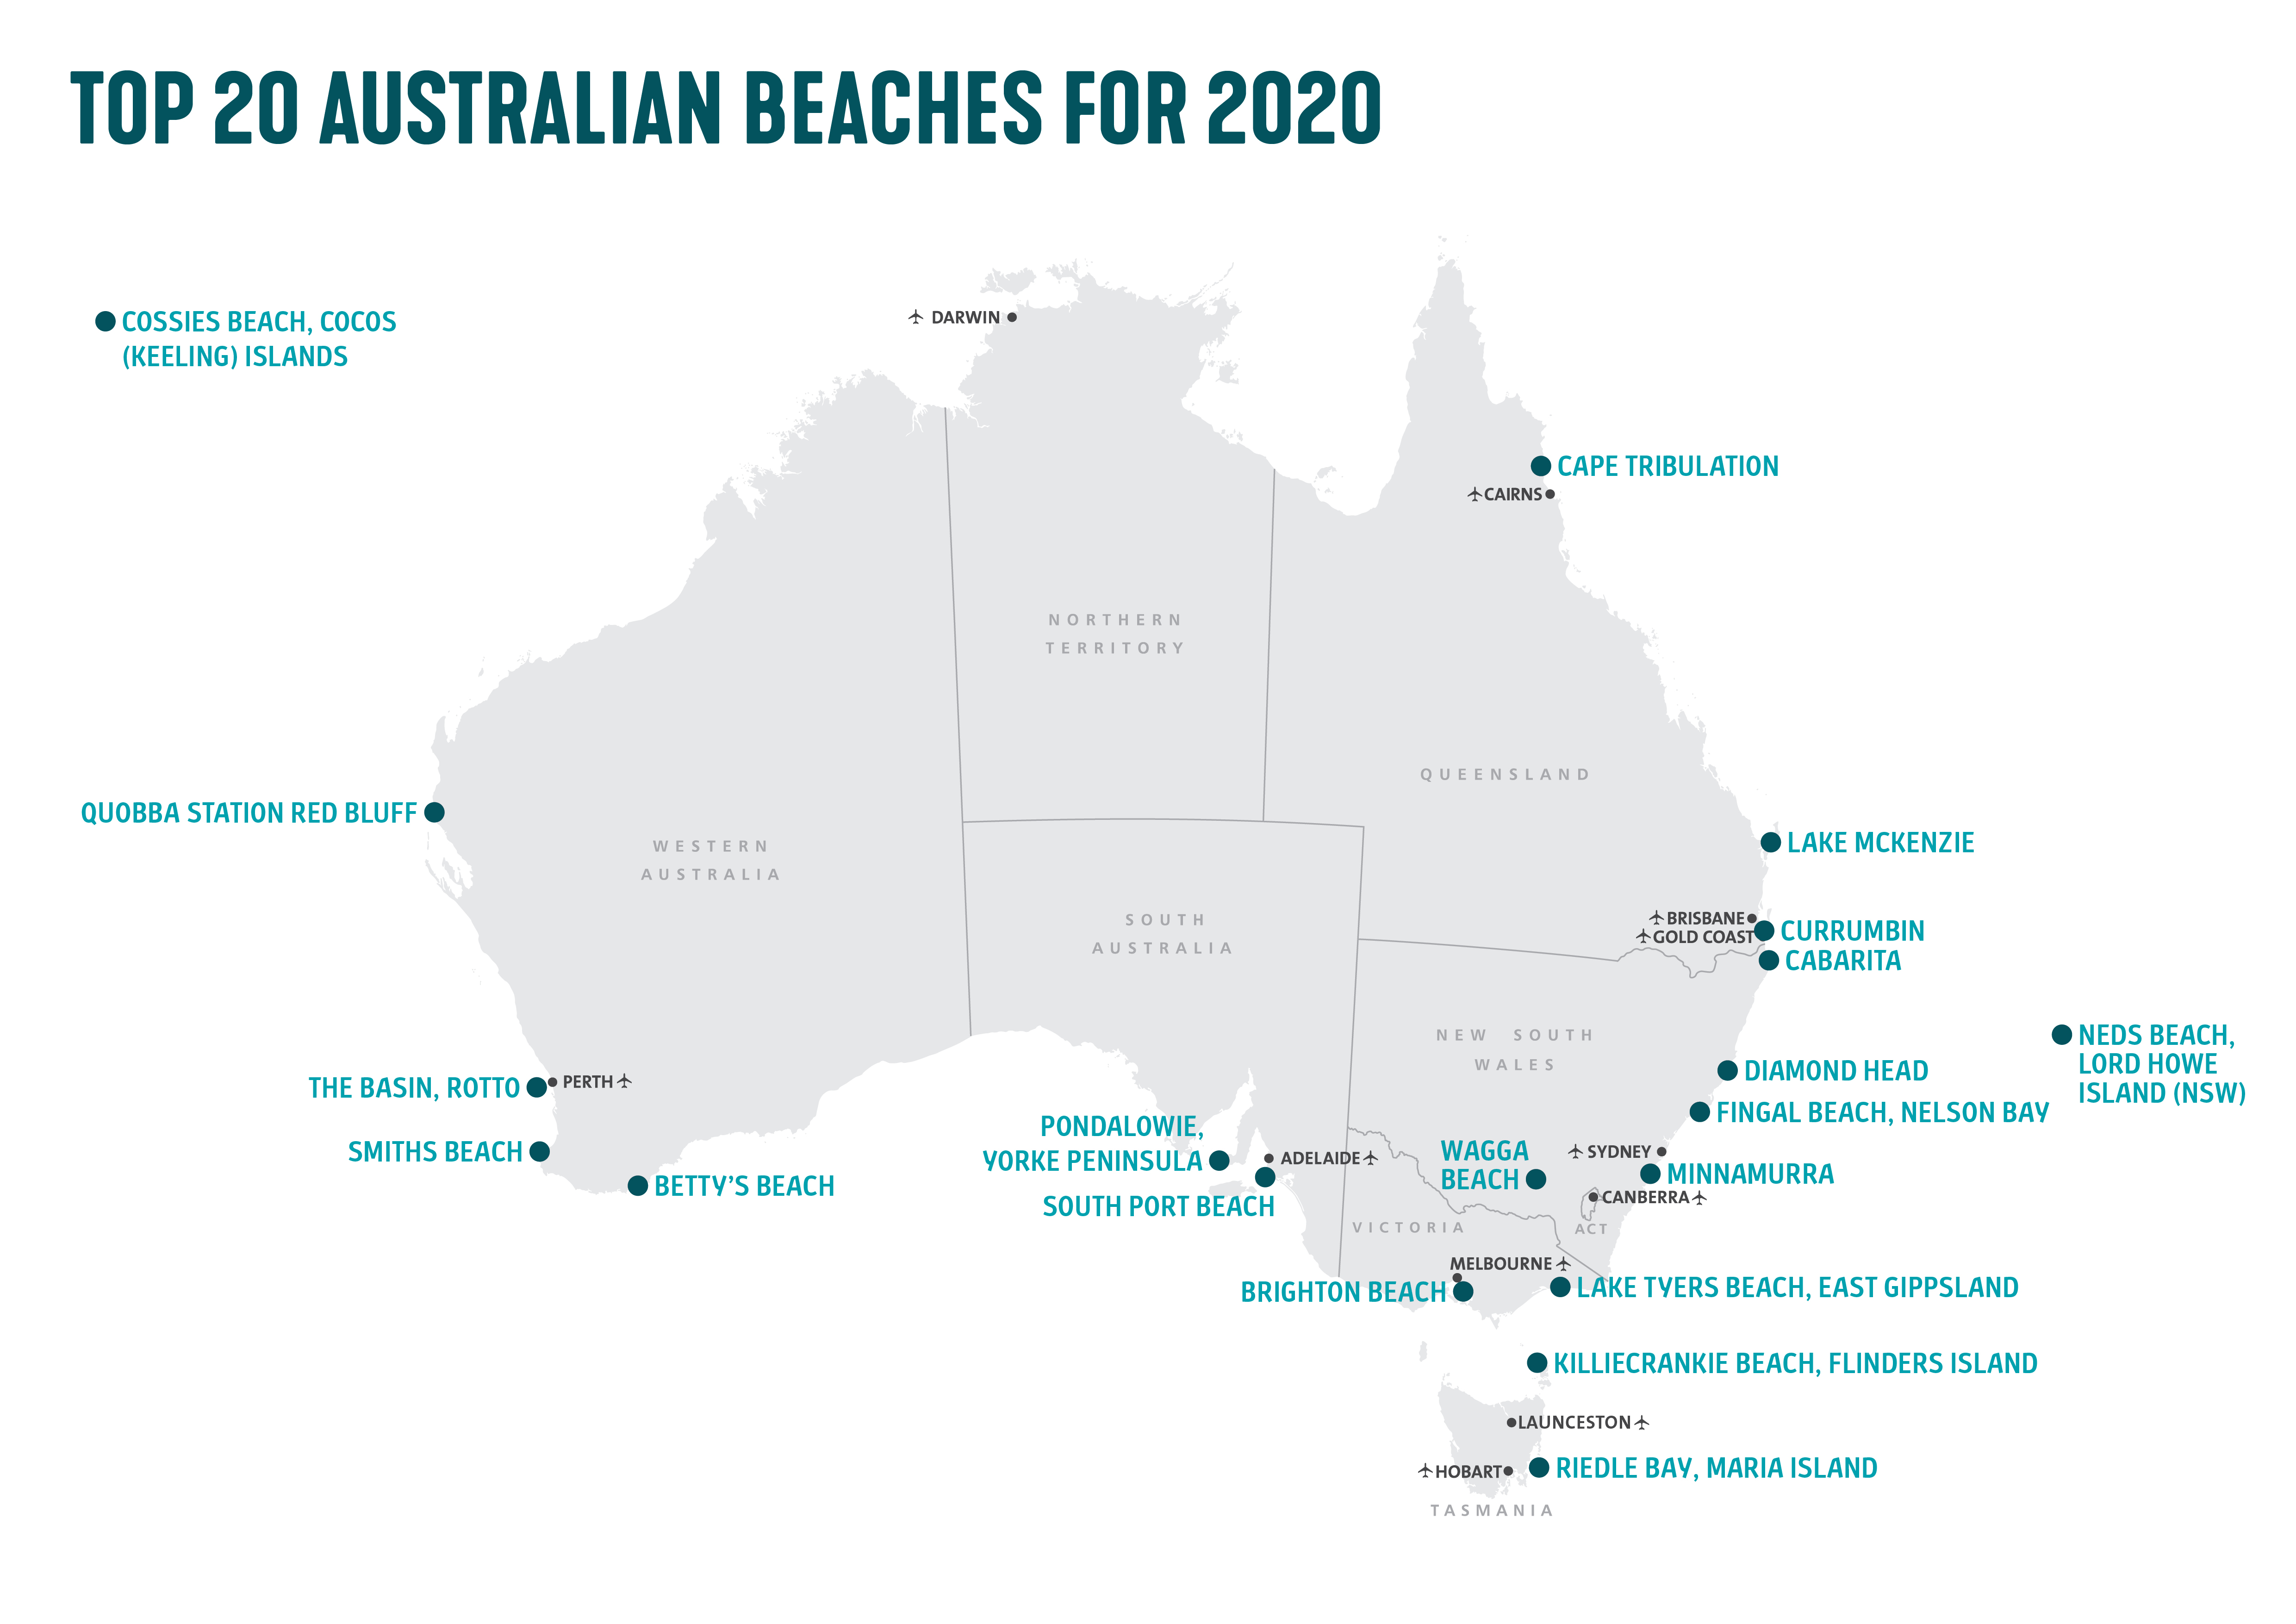 A map of Australia showing the 20 best beaches of 2020